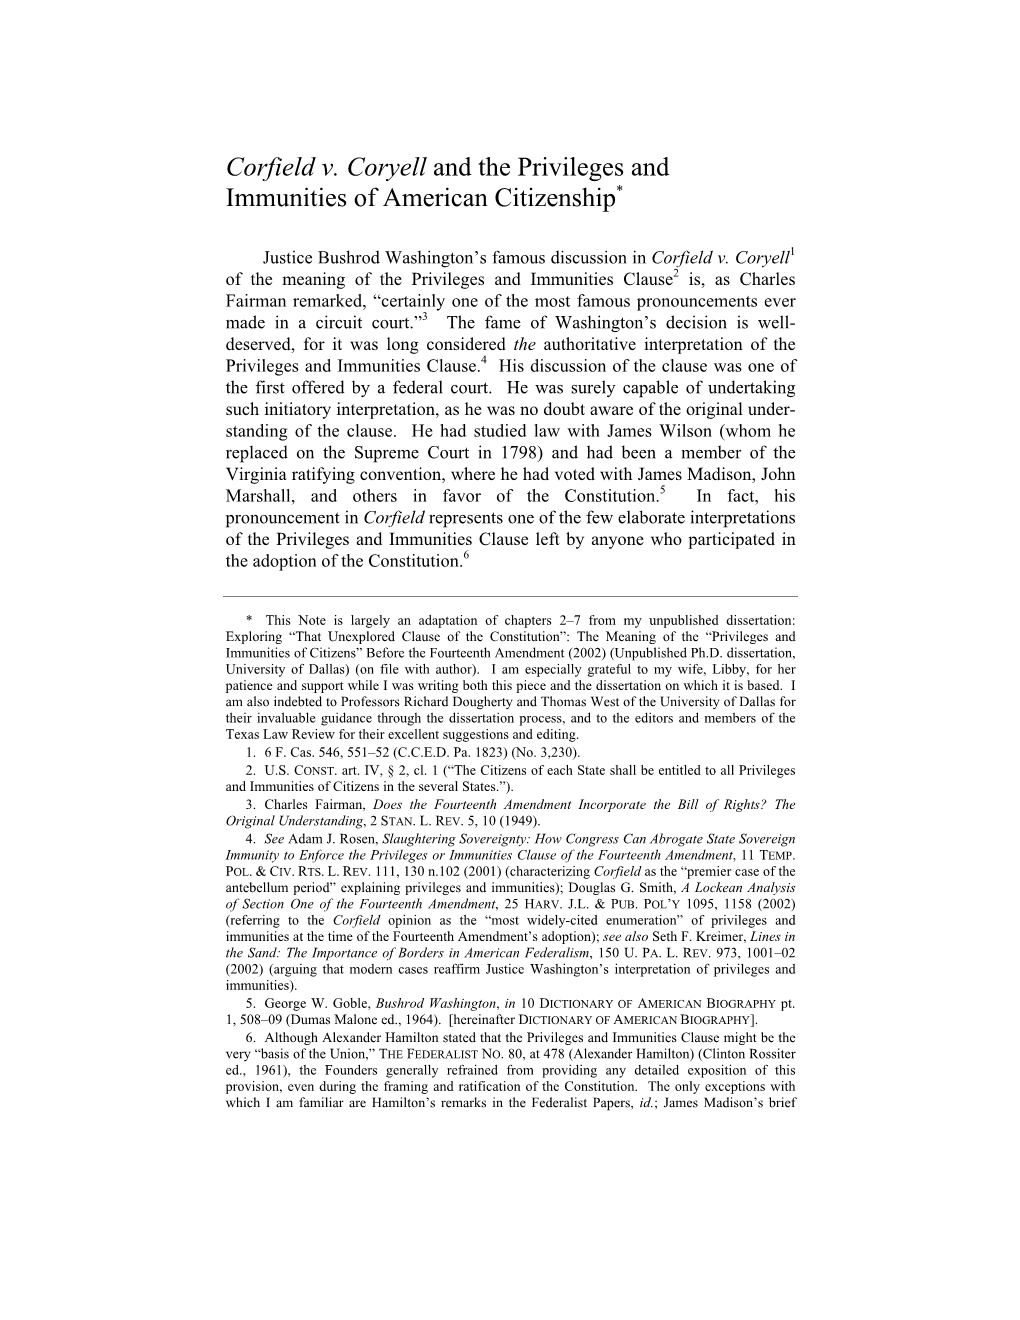 Corfield V. Coryell and the Privileges and Immunities of American Citizenship*